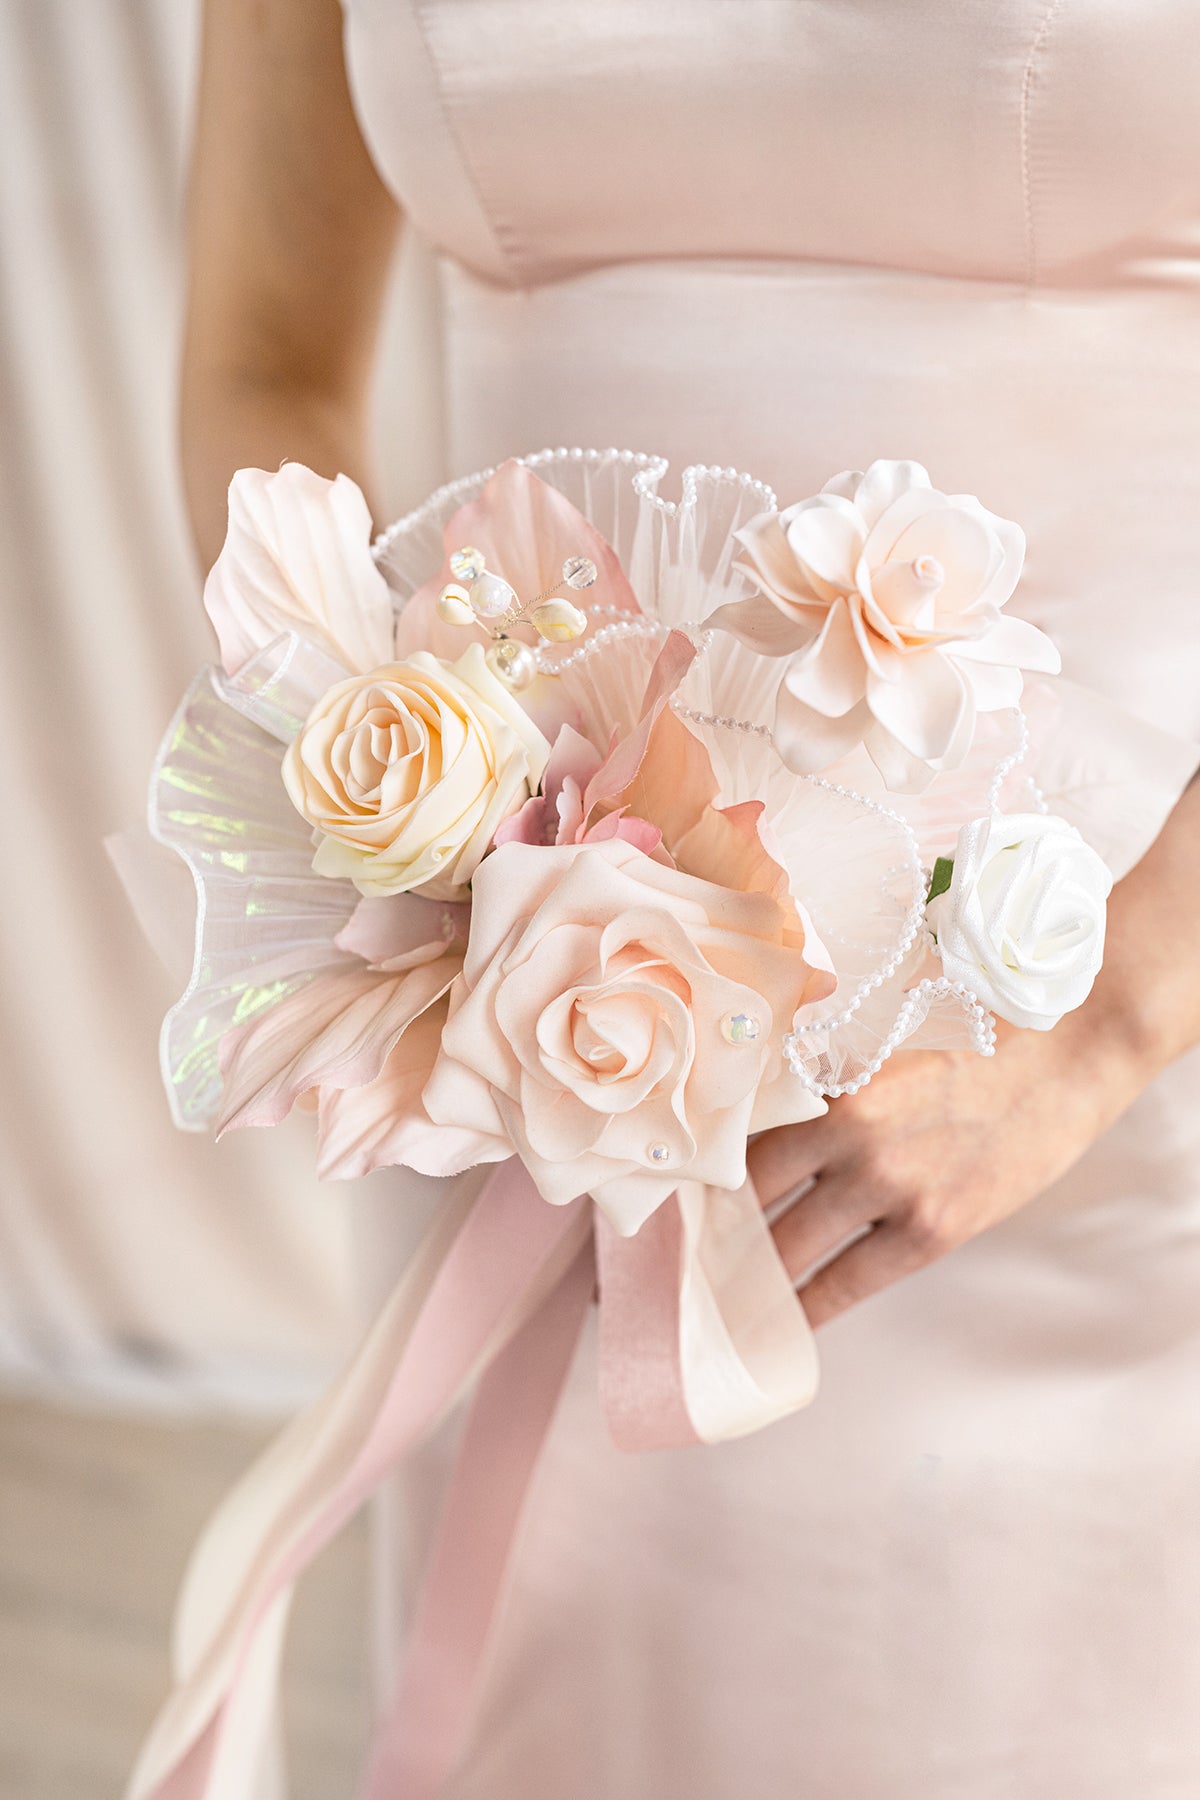 Free-Form Bridesmaid Bouquets in Glowing Blush & Pearl